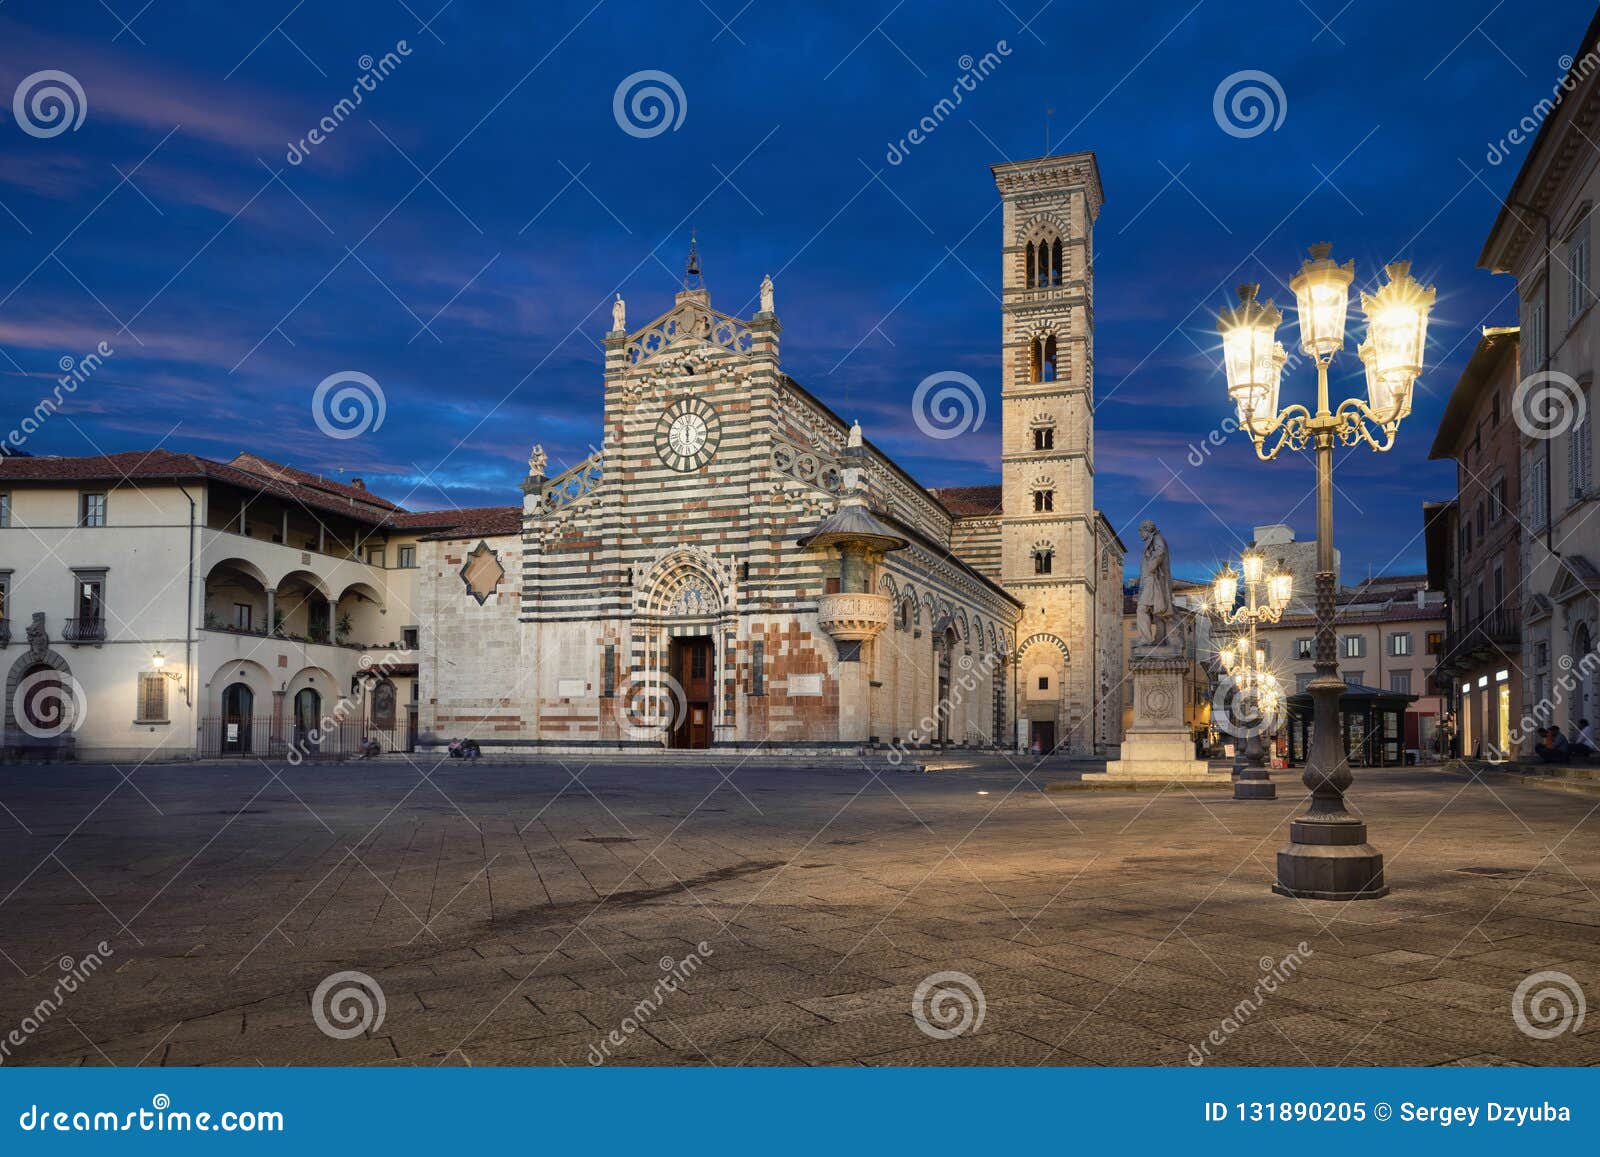 prato, italy. piazza del duomo and cathedral at dusk